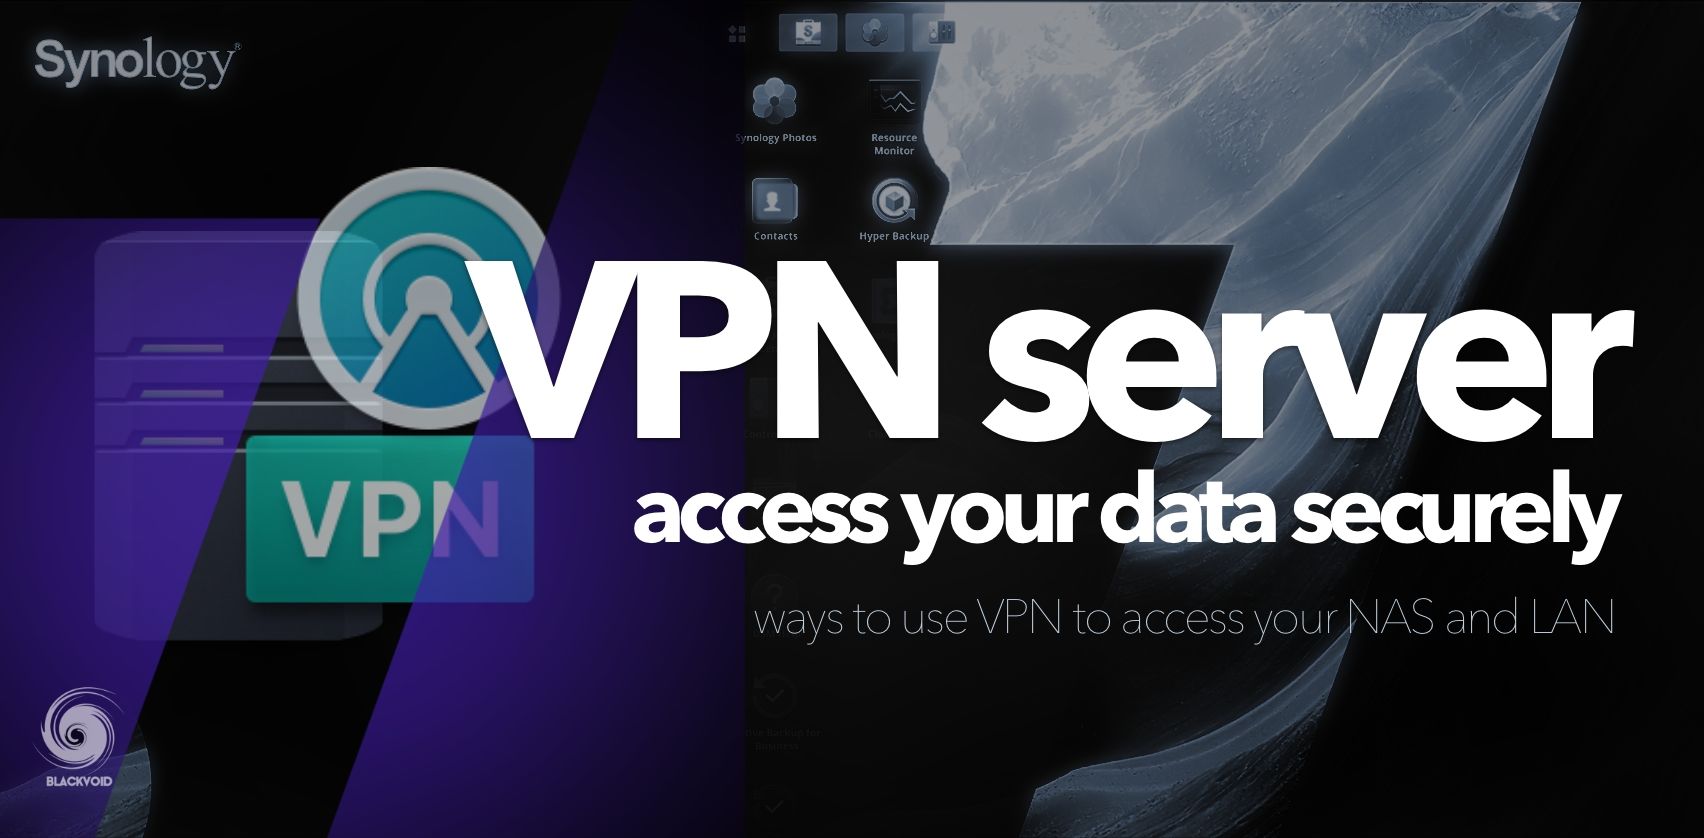 VPN, or how to access your data securely, the right way